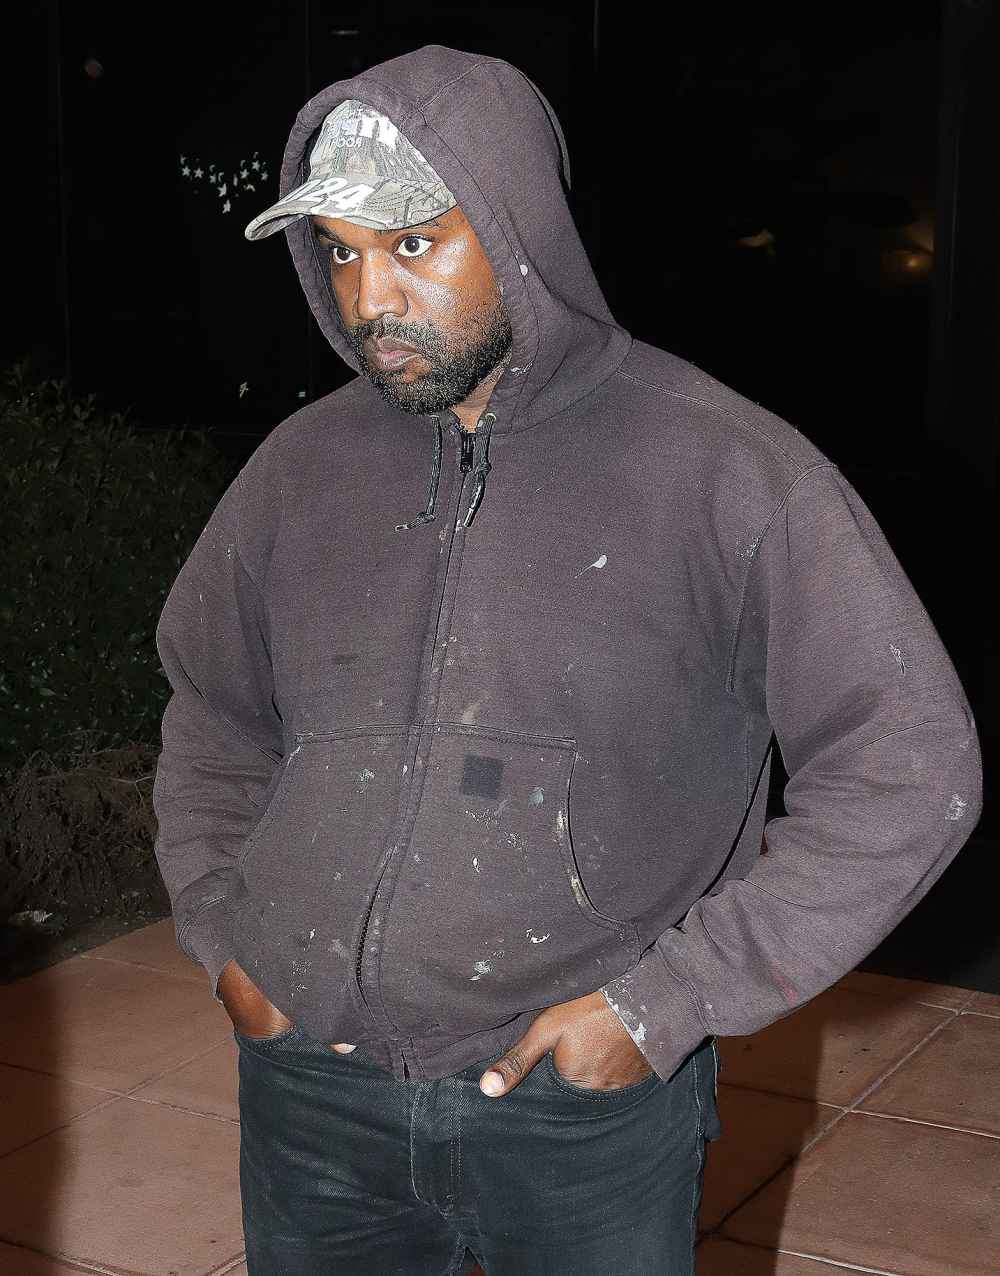 Adidas Officially Terminates Partnership With Kanye West After Controversies 019